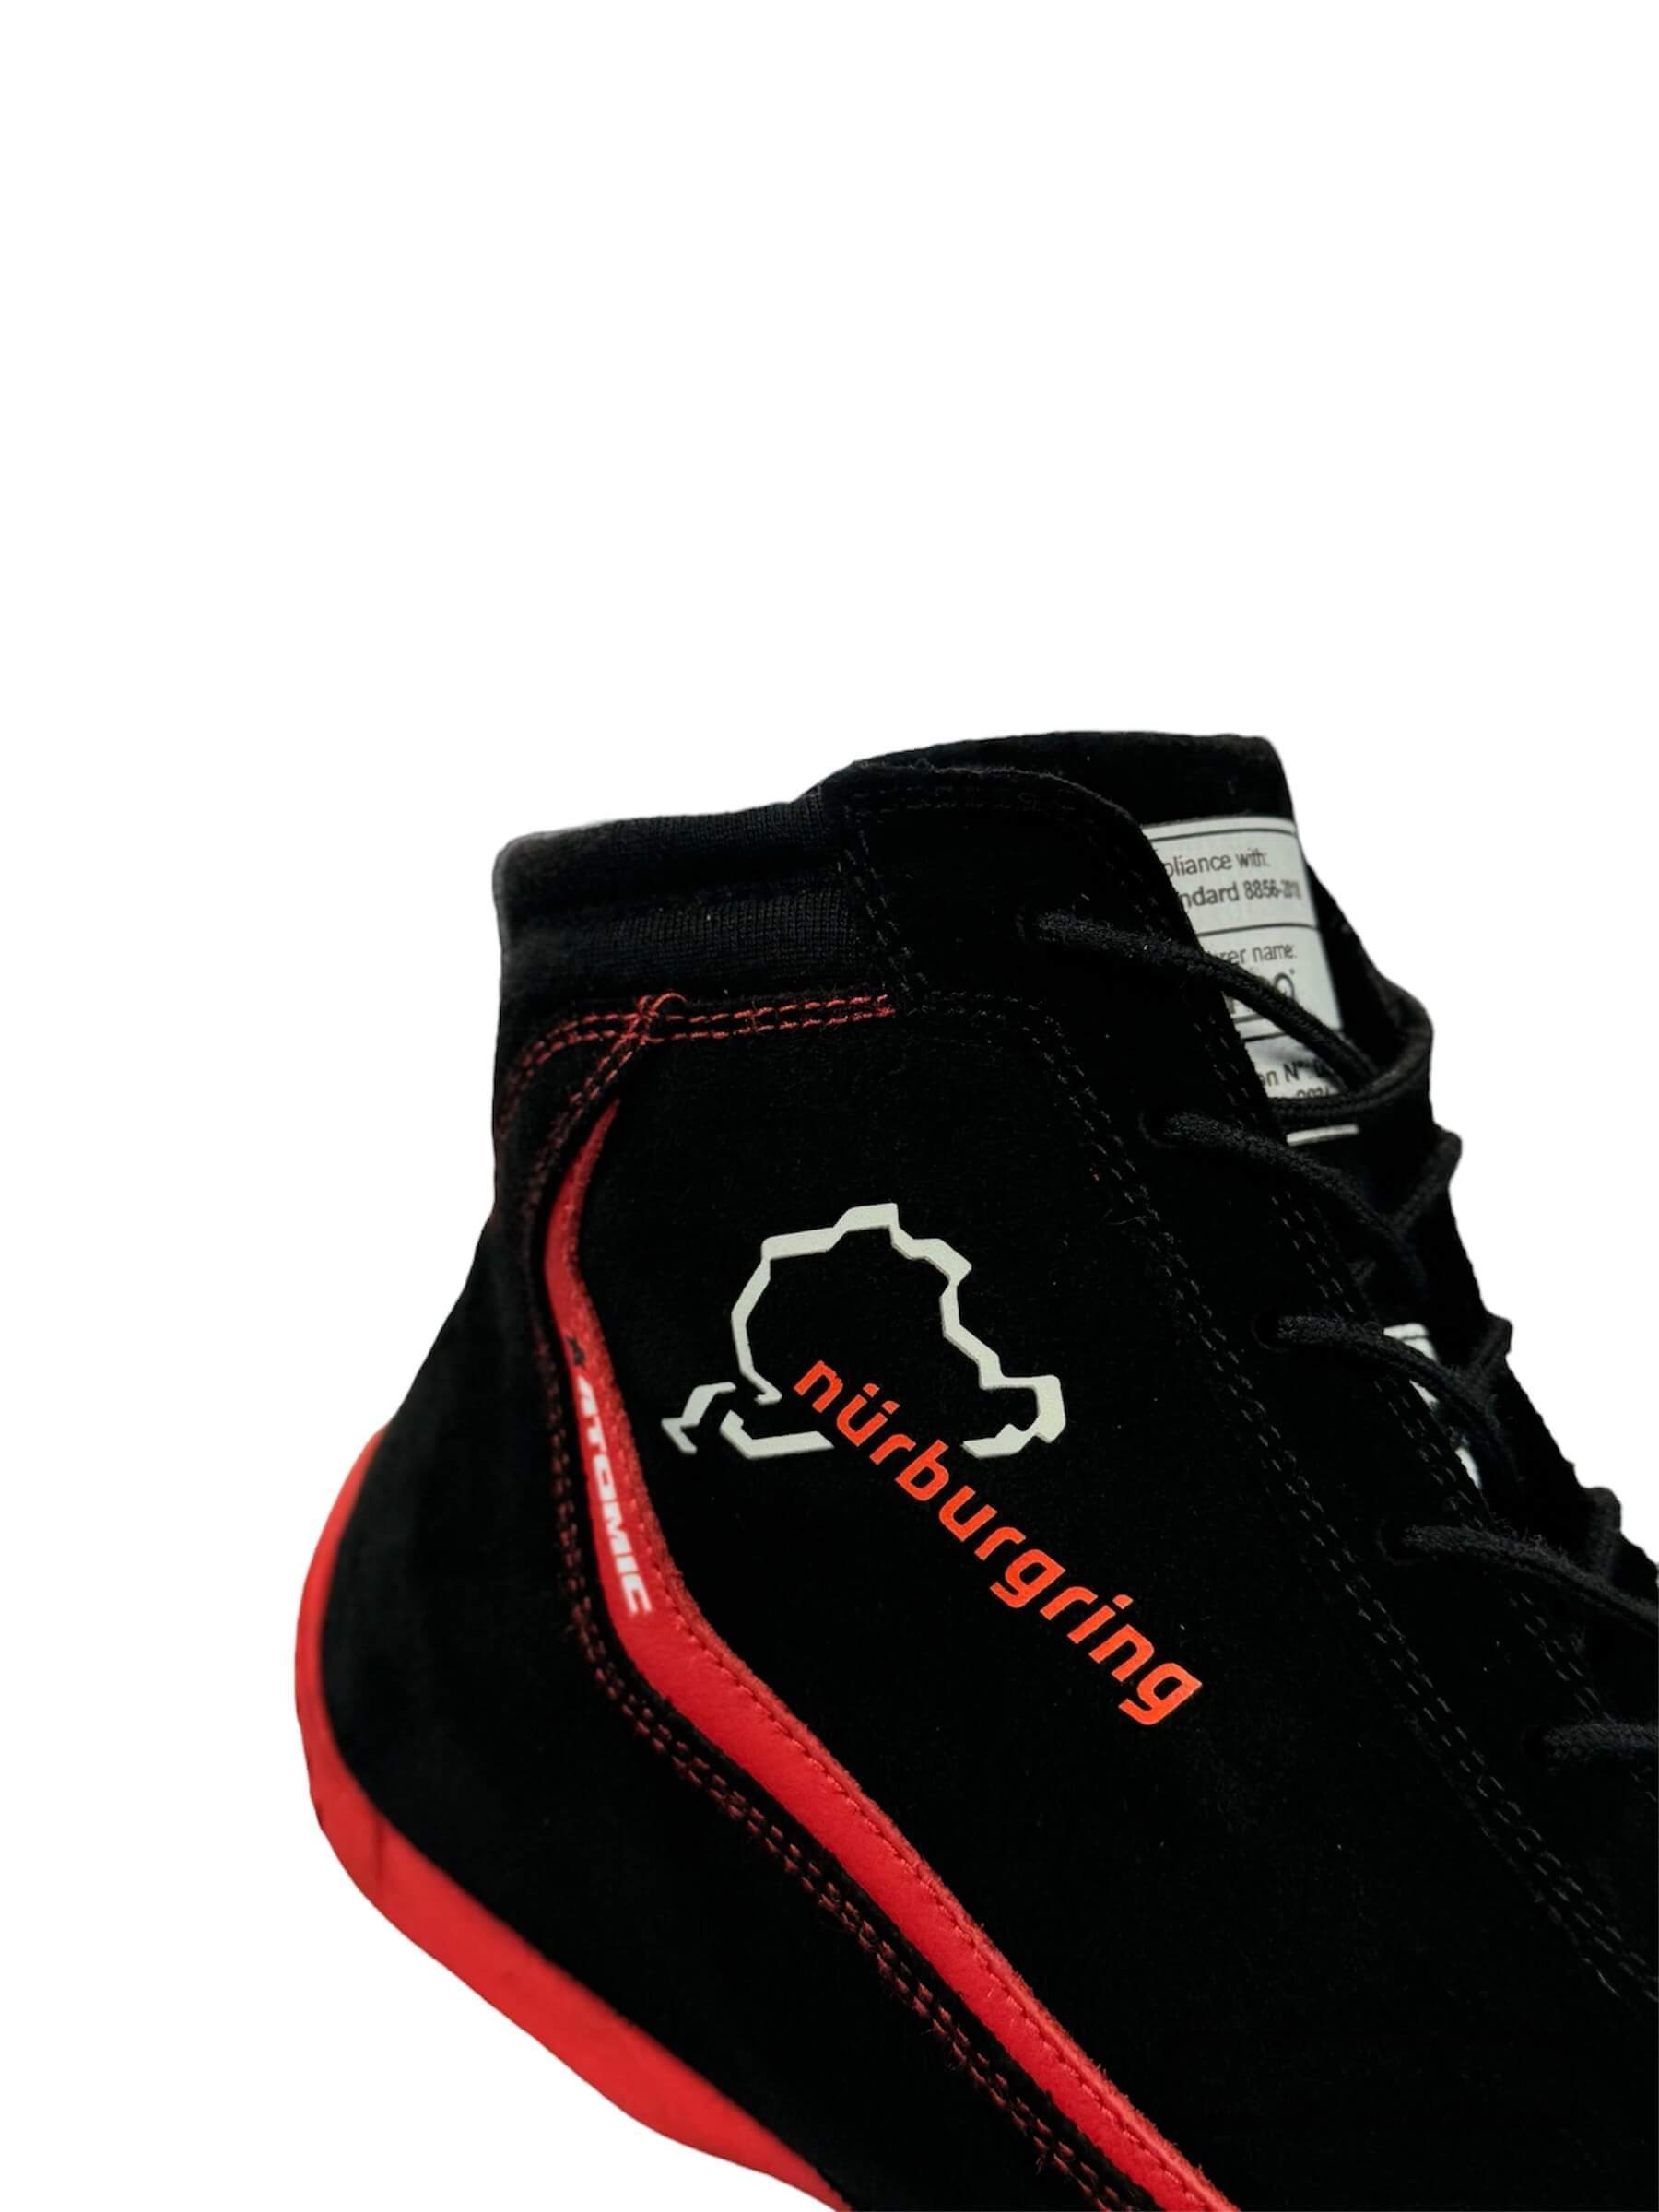 SPARCO 001295SP_NBR39 Shoes Slalom Nurburgring Edition black/red Size 39 Photo-4 